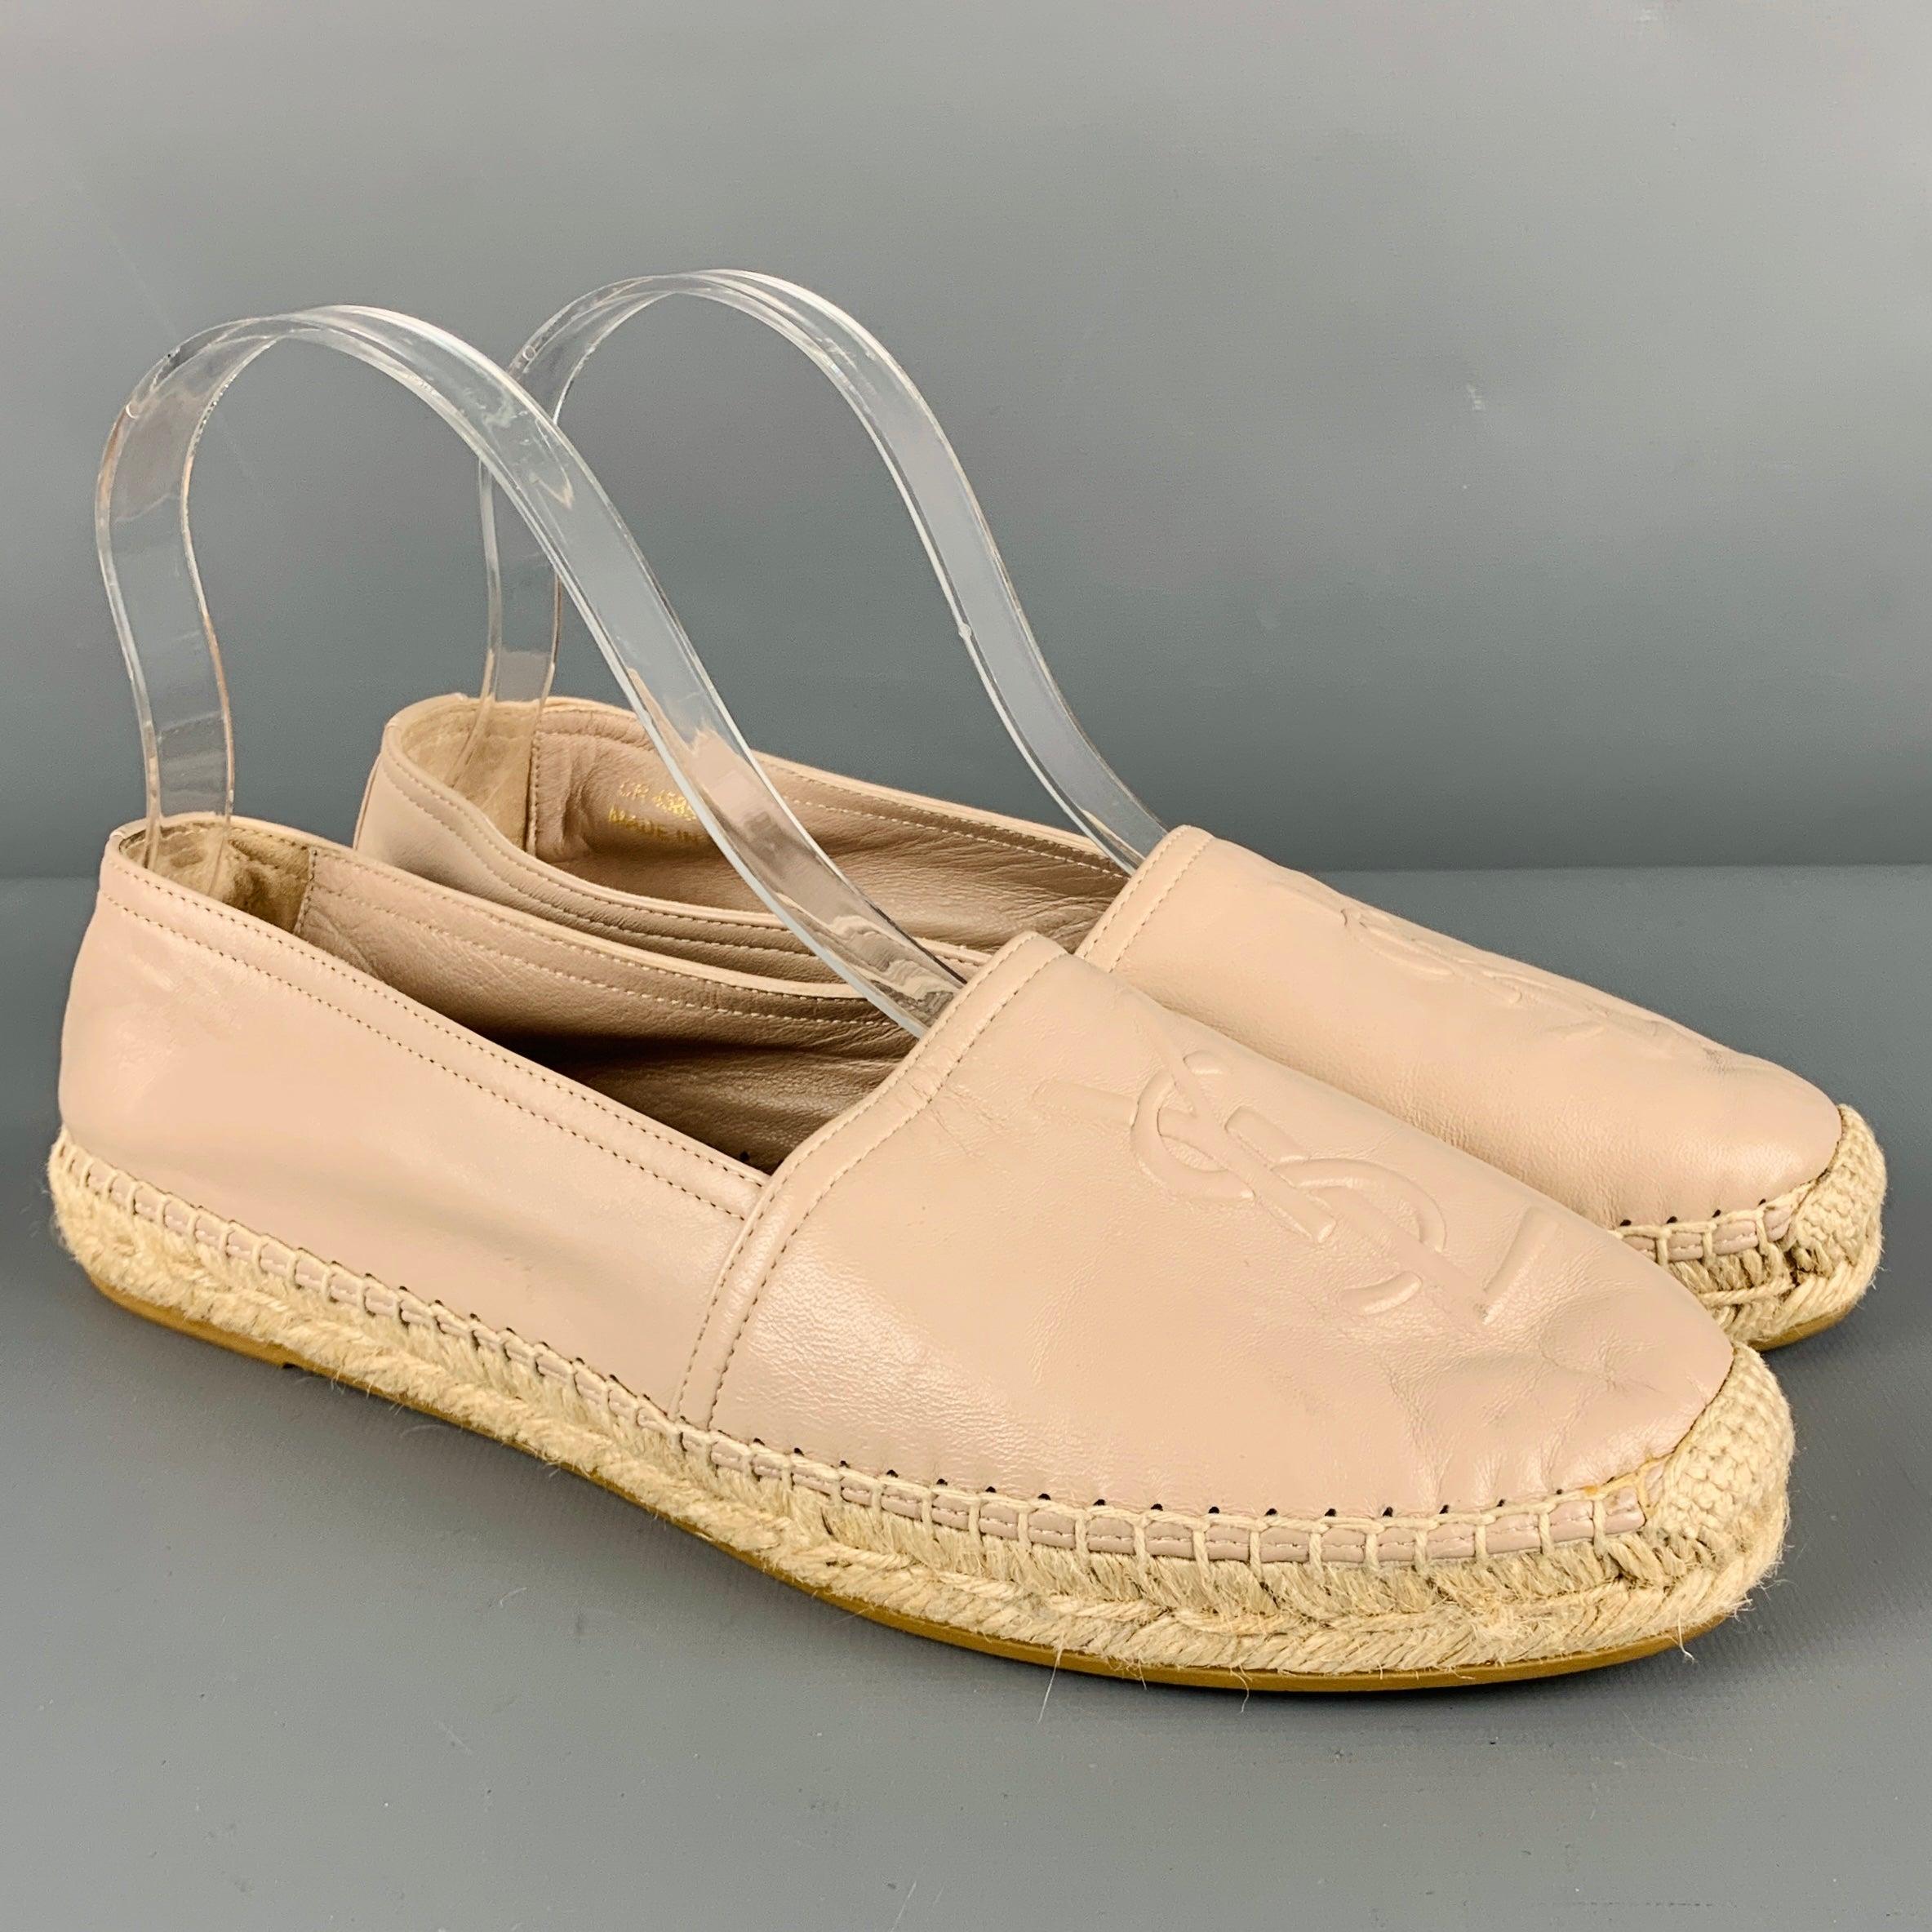 SAINT LAURENT flats
in a beige leather featuring an espadrille style, embossed monogram logo, and slip on closure. Made in Spainches Very Good Pre-Owned Condition. Minor signs of wear. 

Marked:   CR 458573 39.5Outsole: 10.5 inches  x 3.25 inches 
 